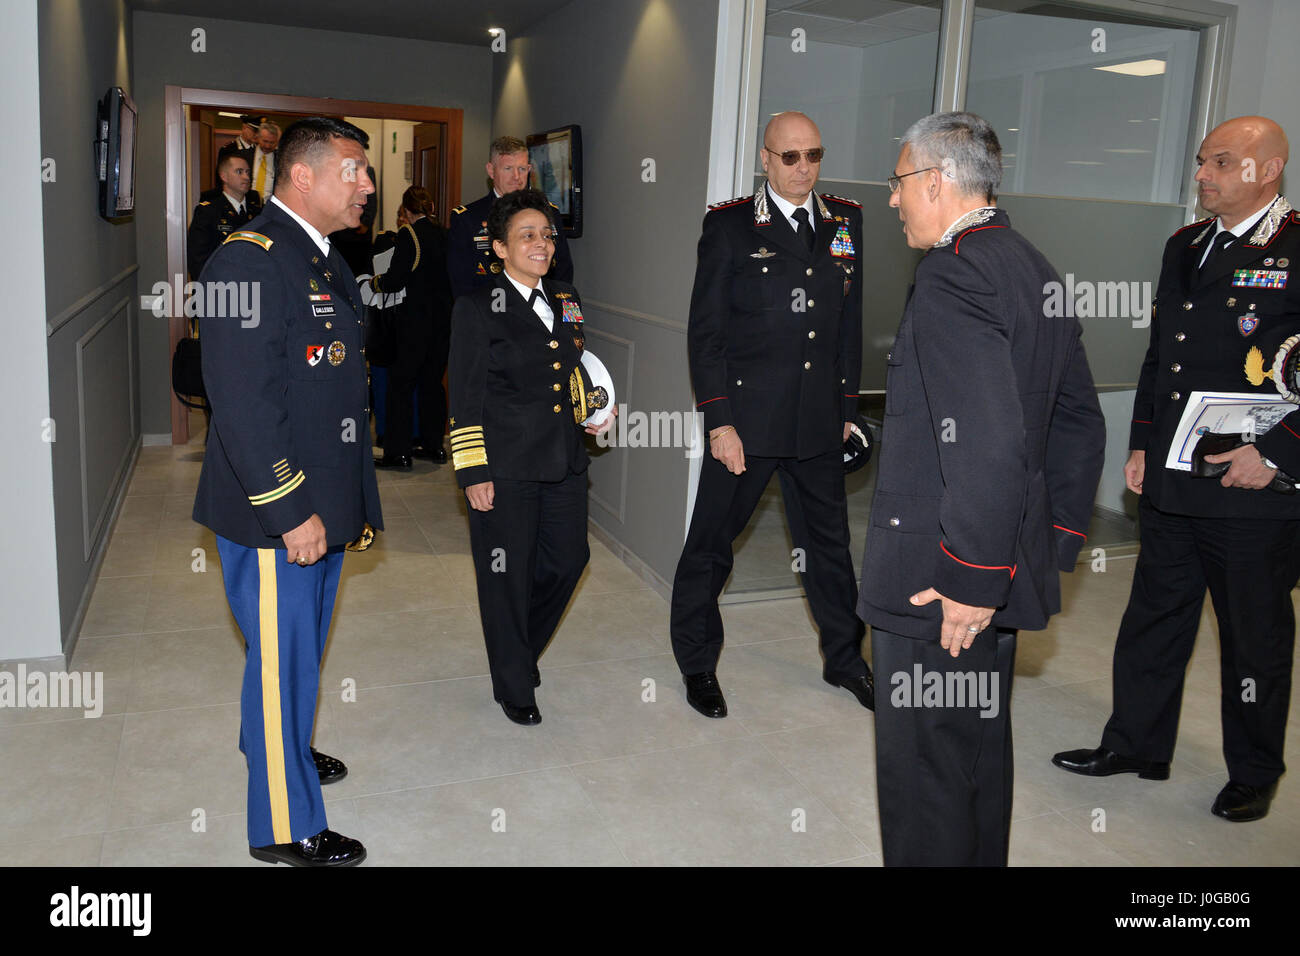 Admiral Michelle Howard, NATO JFC-Naples Commander, observes the room training area “Magistra” during the visit at the Center of Excellence for Stability Police Units (CoESPU) Vicenza, April 10, 2017. (U.S. Army Photo by Visual Information Specialist Paolo Bovo/released) Stock Photo